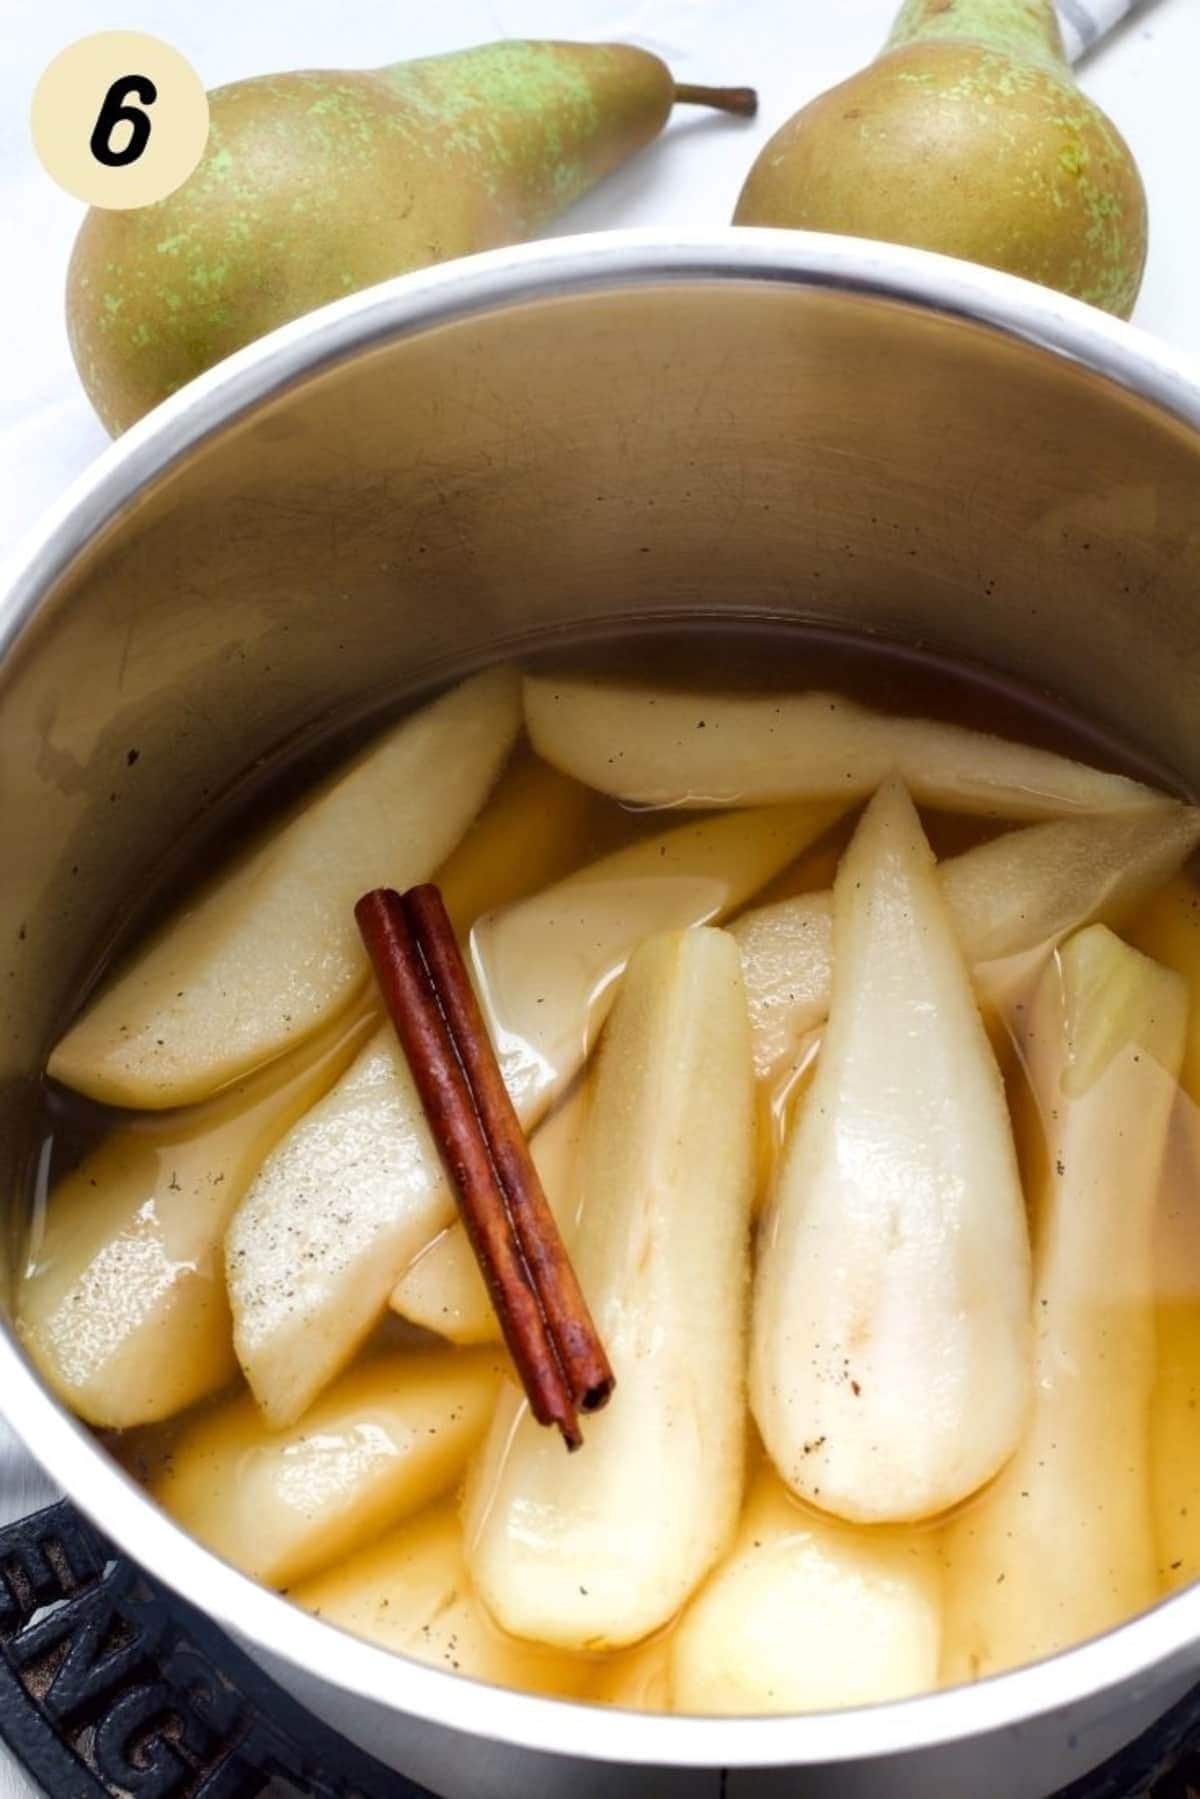 Pan with pears in cooking liquid with cinnamon stick.